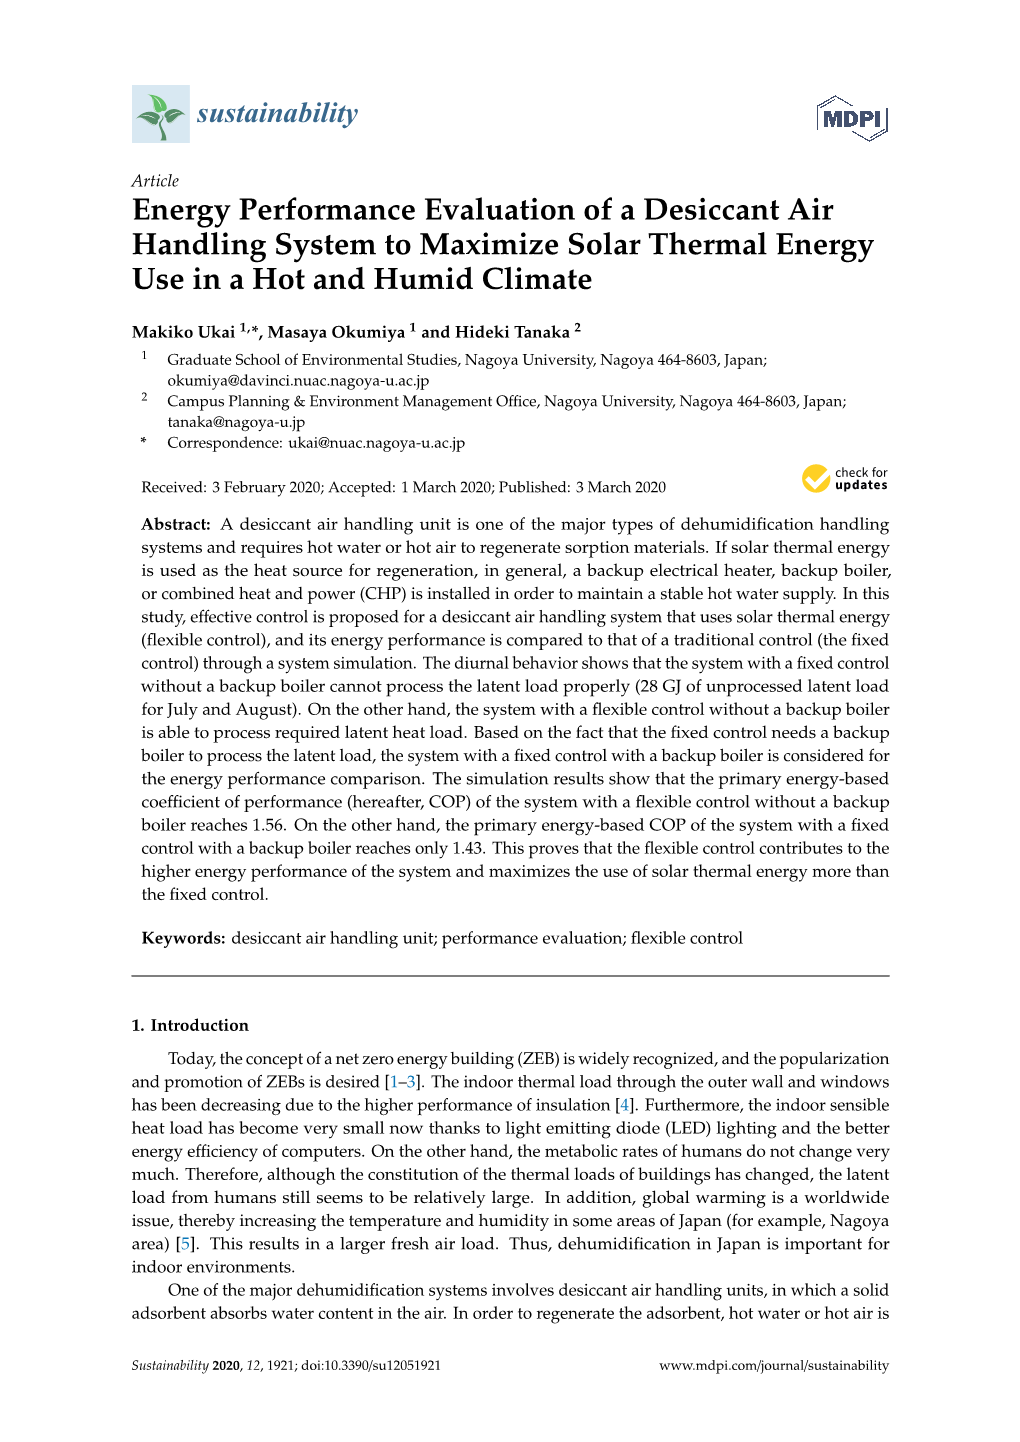 Energy Performance Evaluation of a Desiccant Air Handling System to Maximize Solar Thermal Energy Use in a Hot and Humid Climate